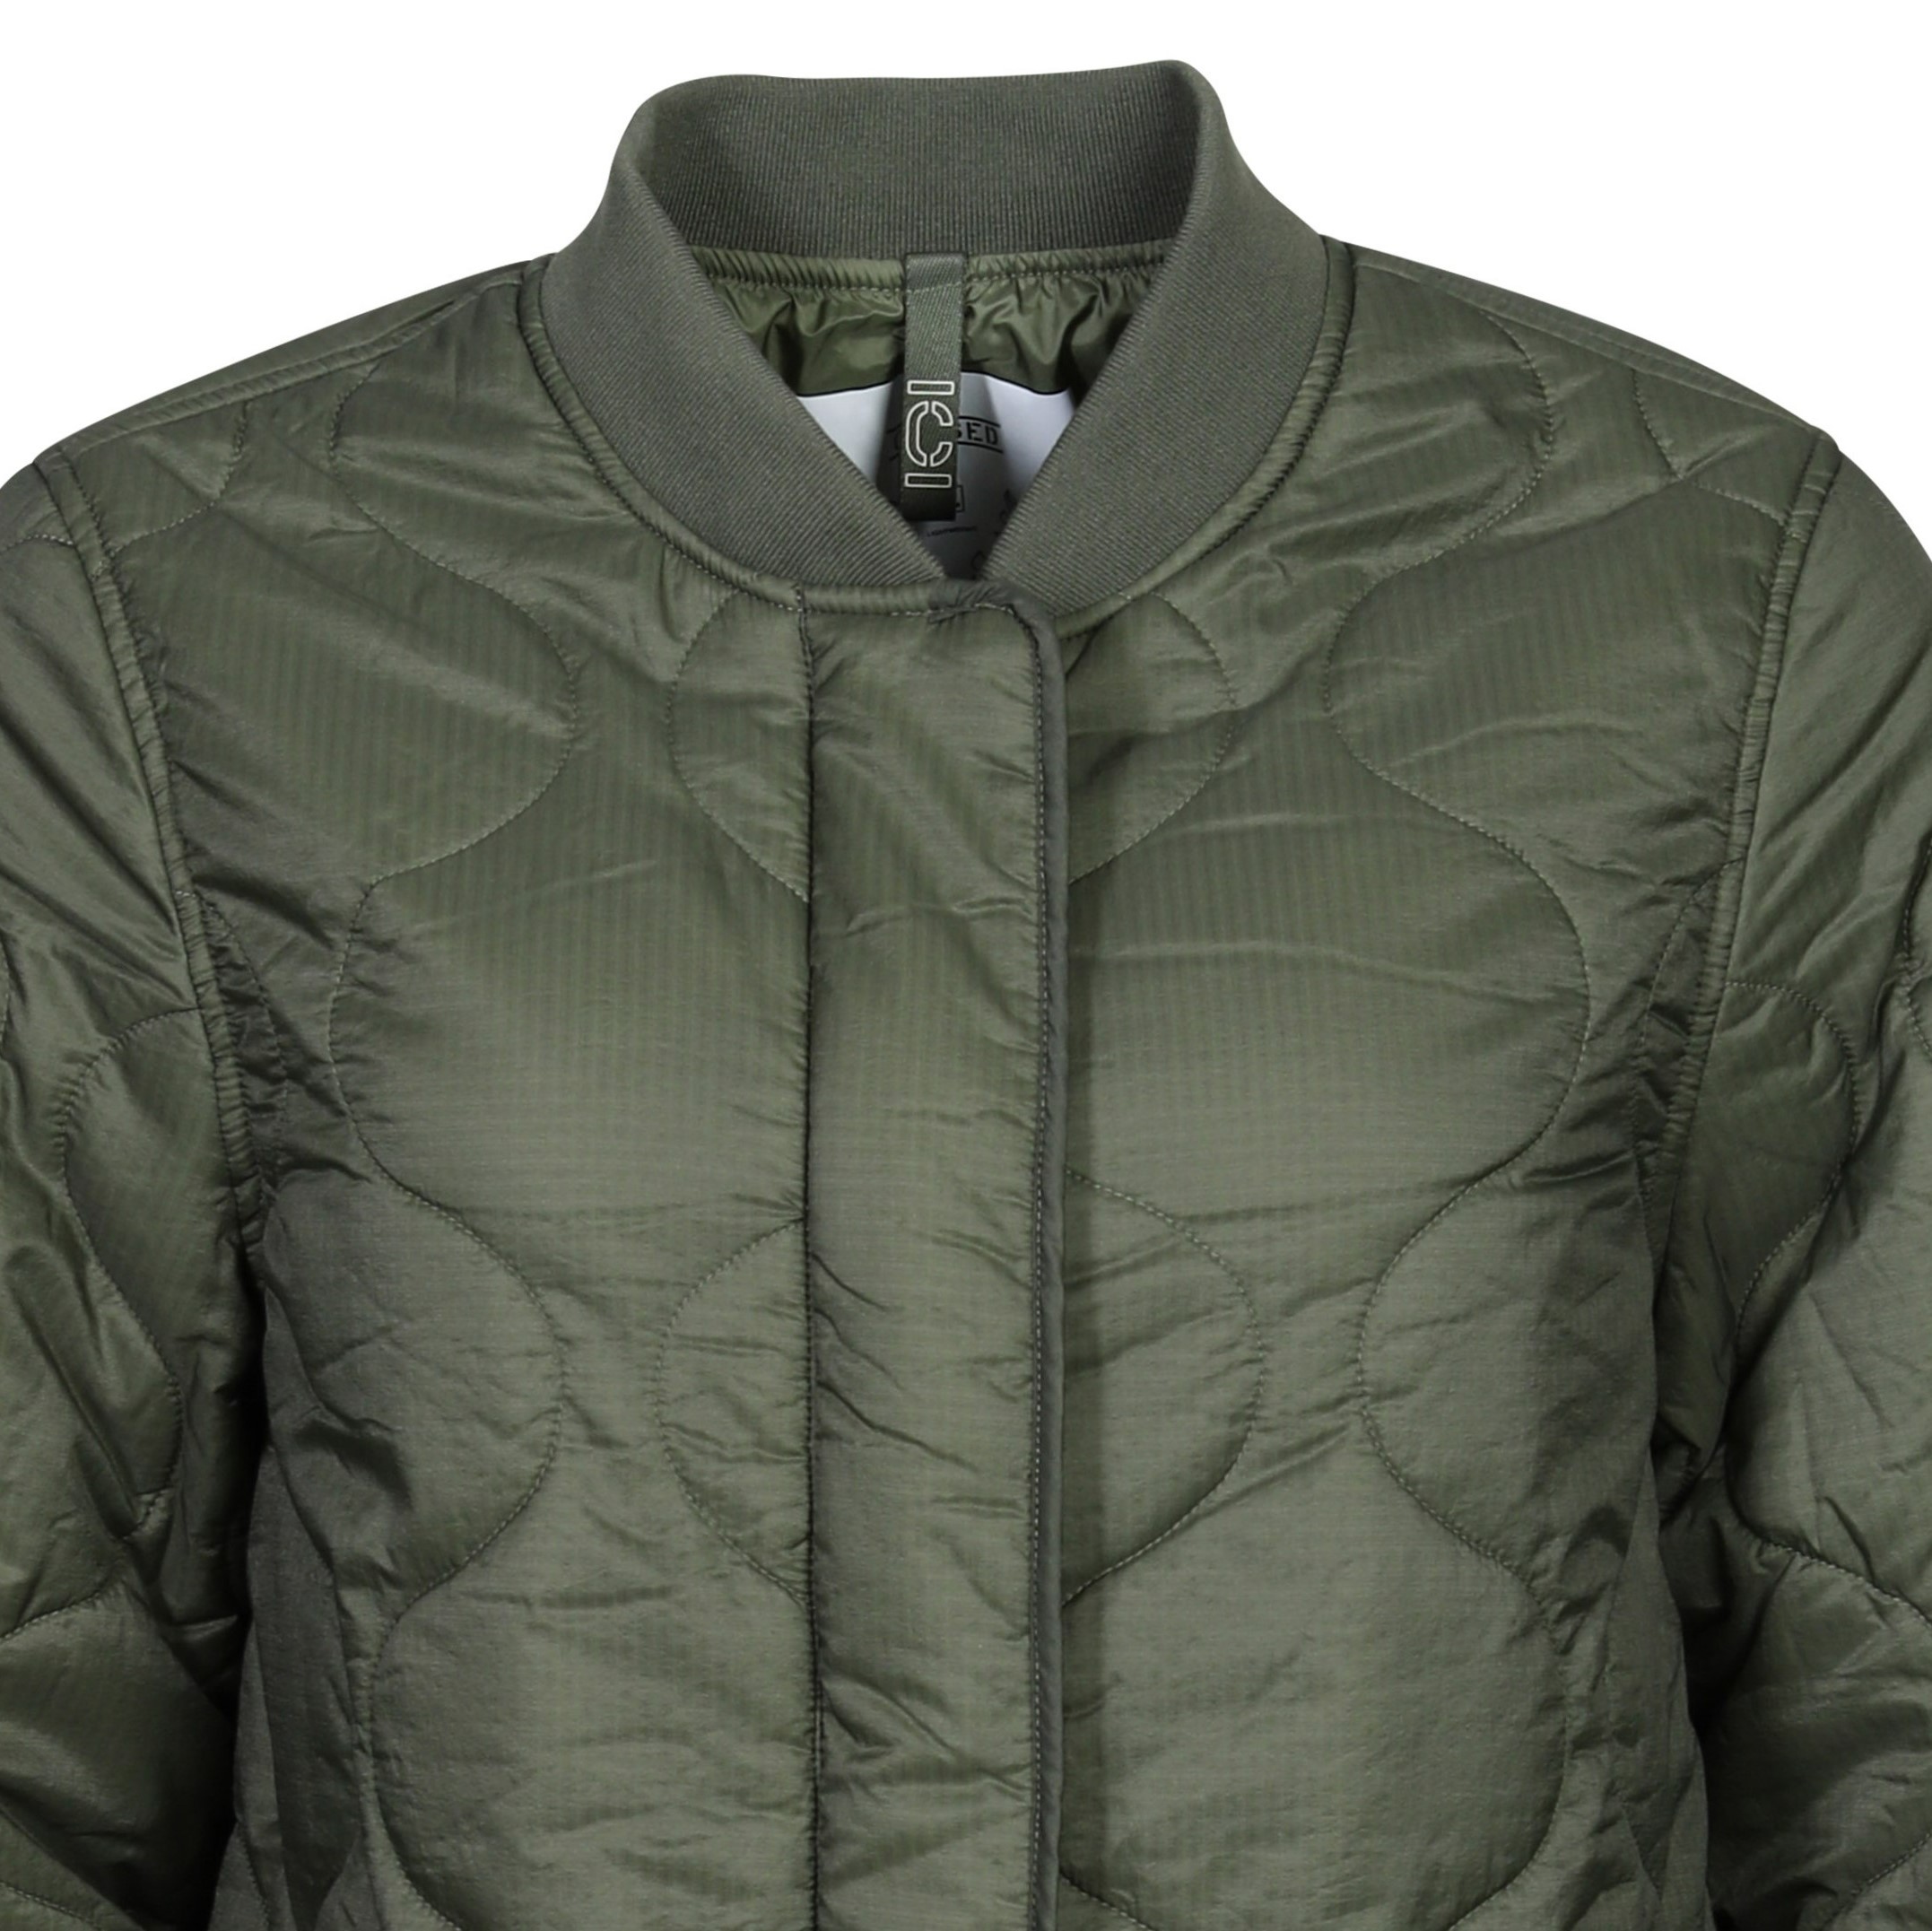 Closed Light Weight Nylon Coat in Army Green M